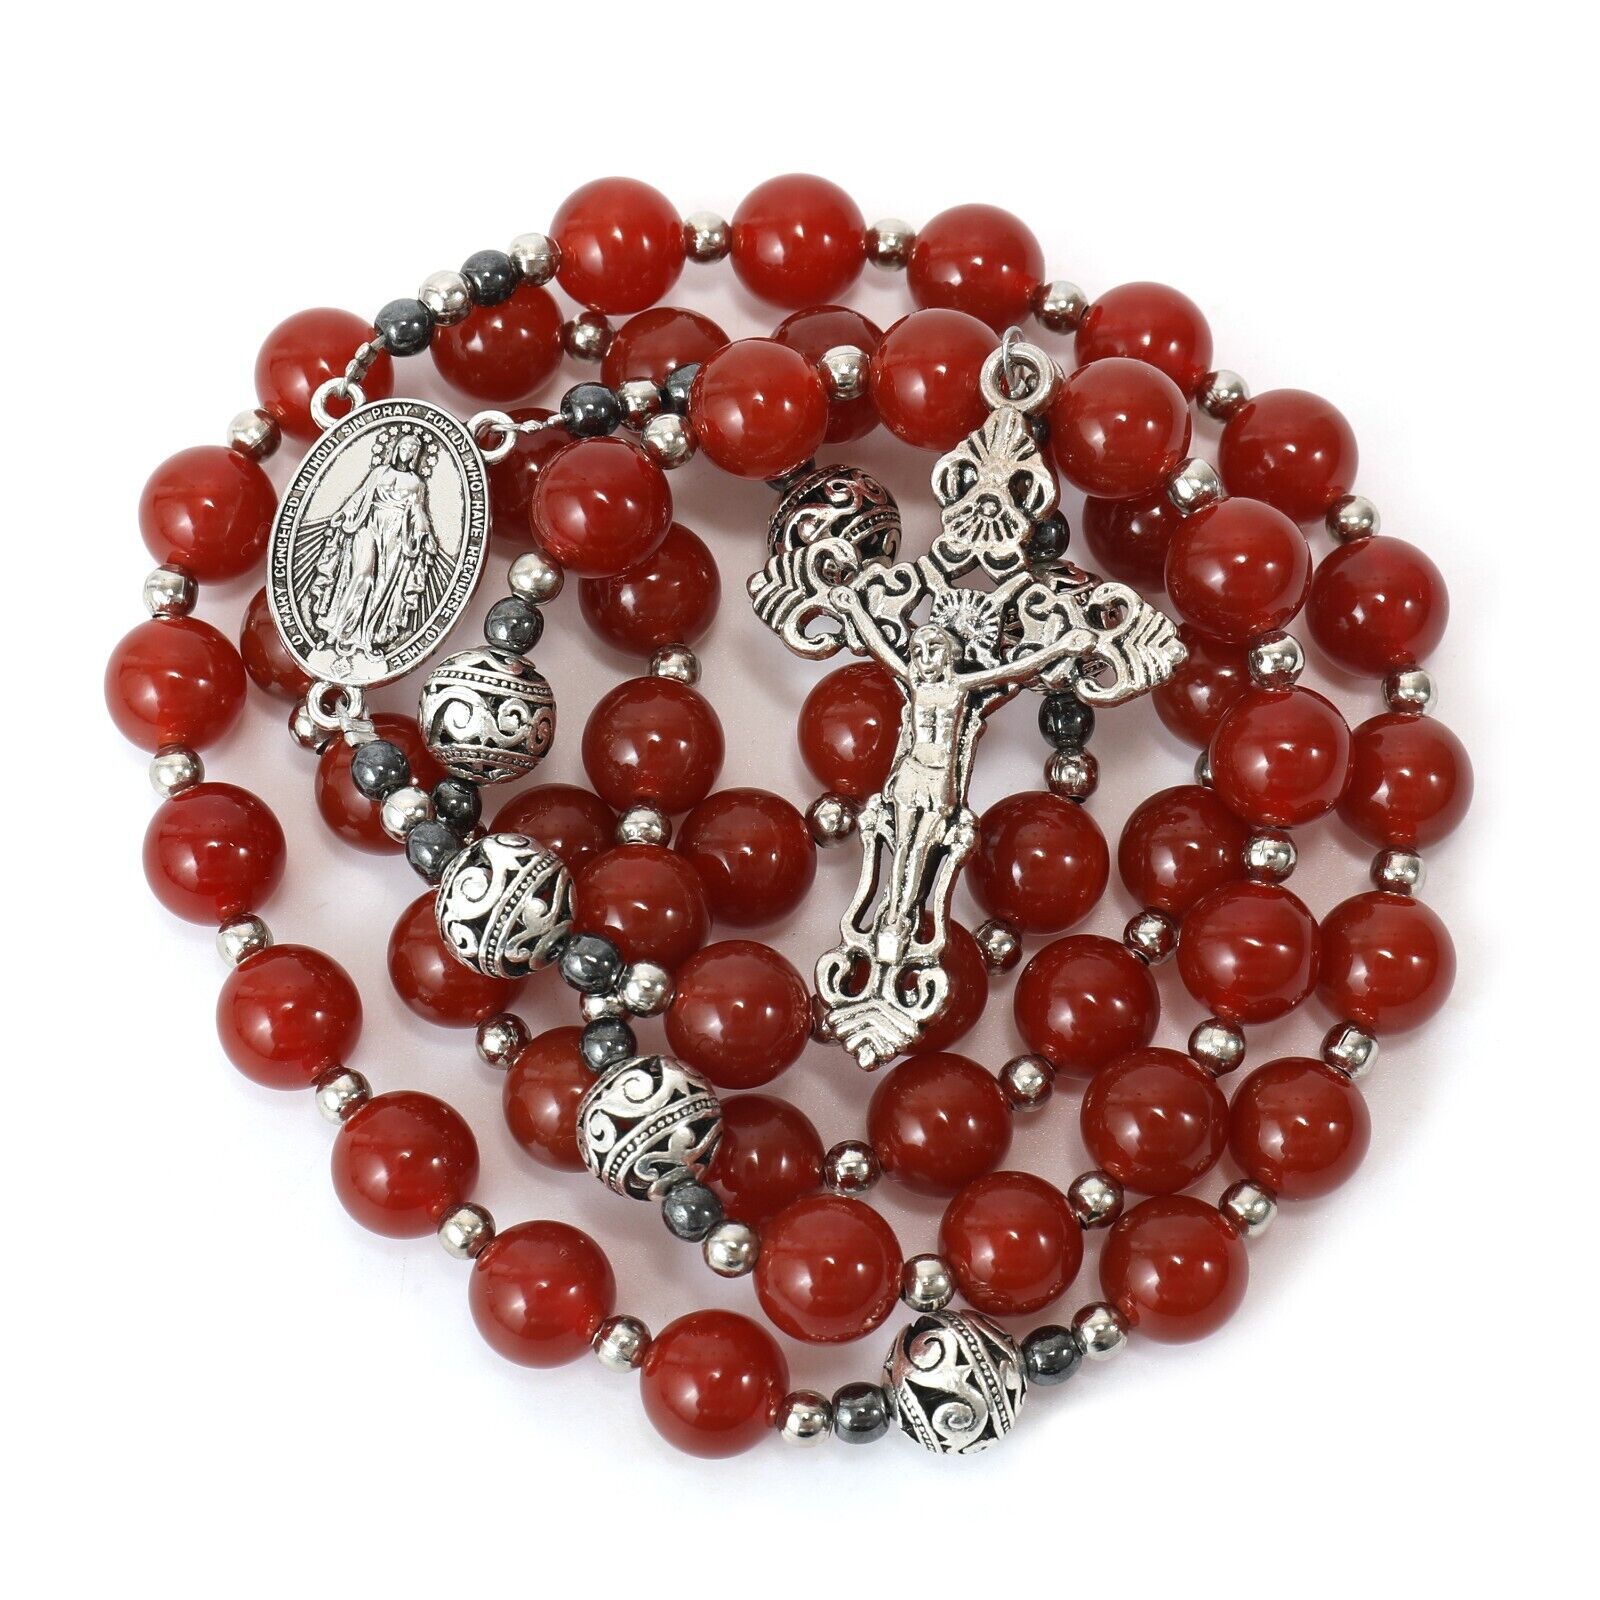 Red Garnet Beads Rosary Necklace Miraculous Medal with Silver Crucifix